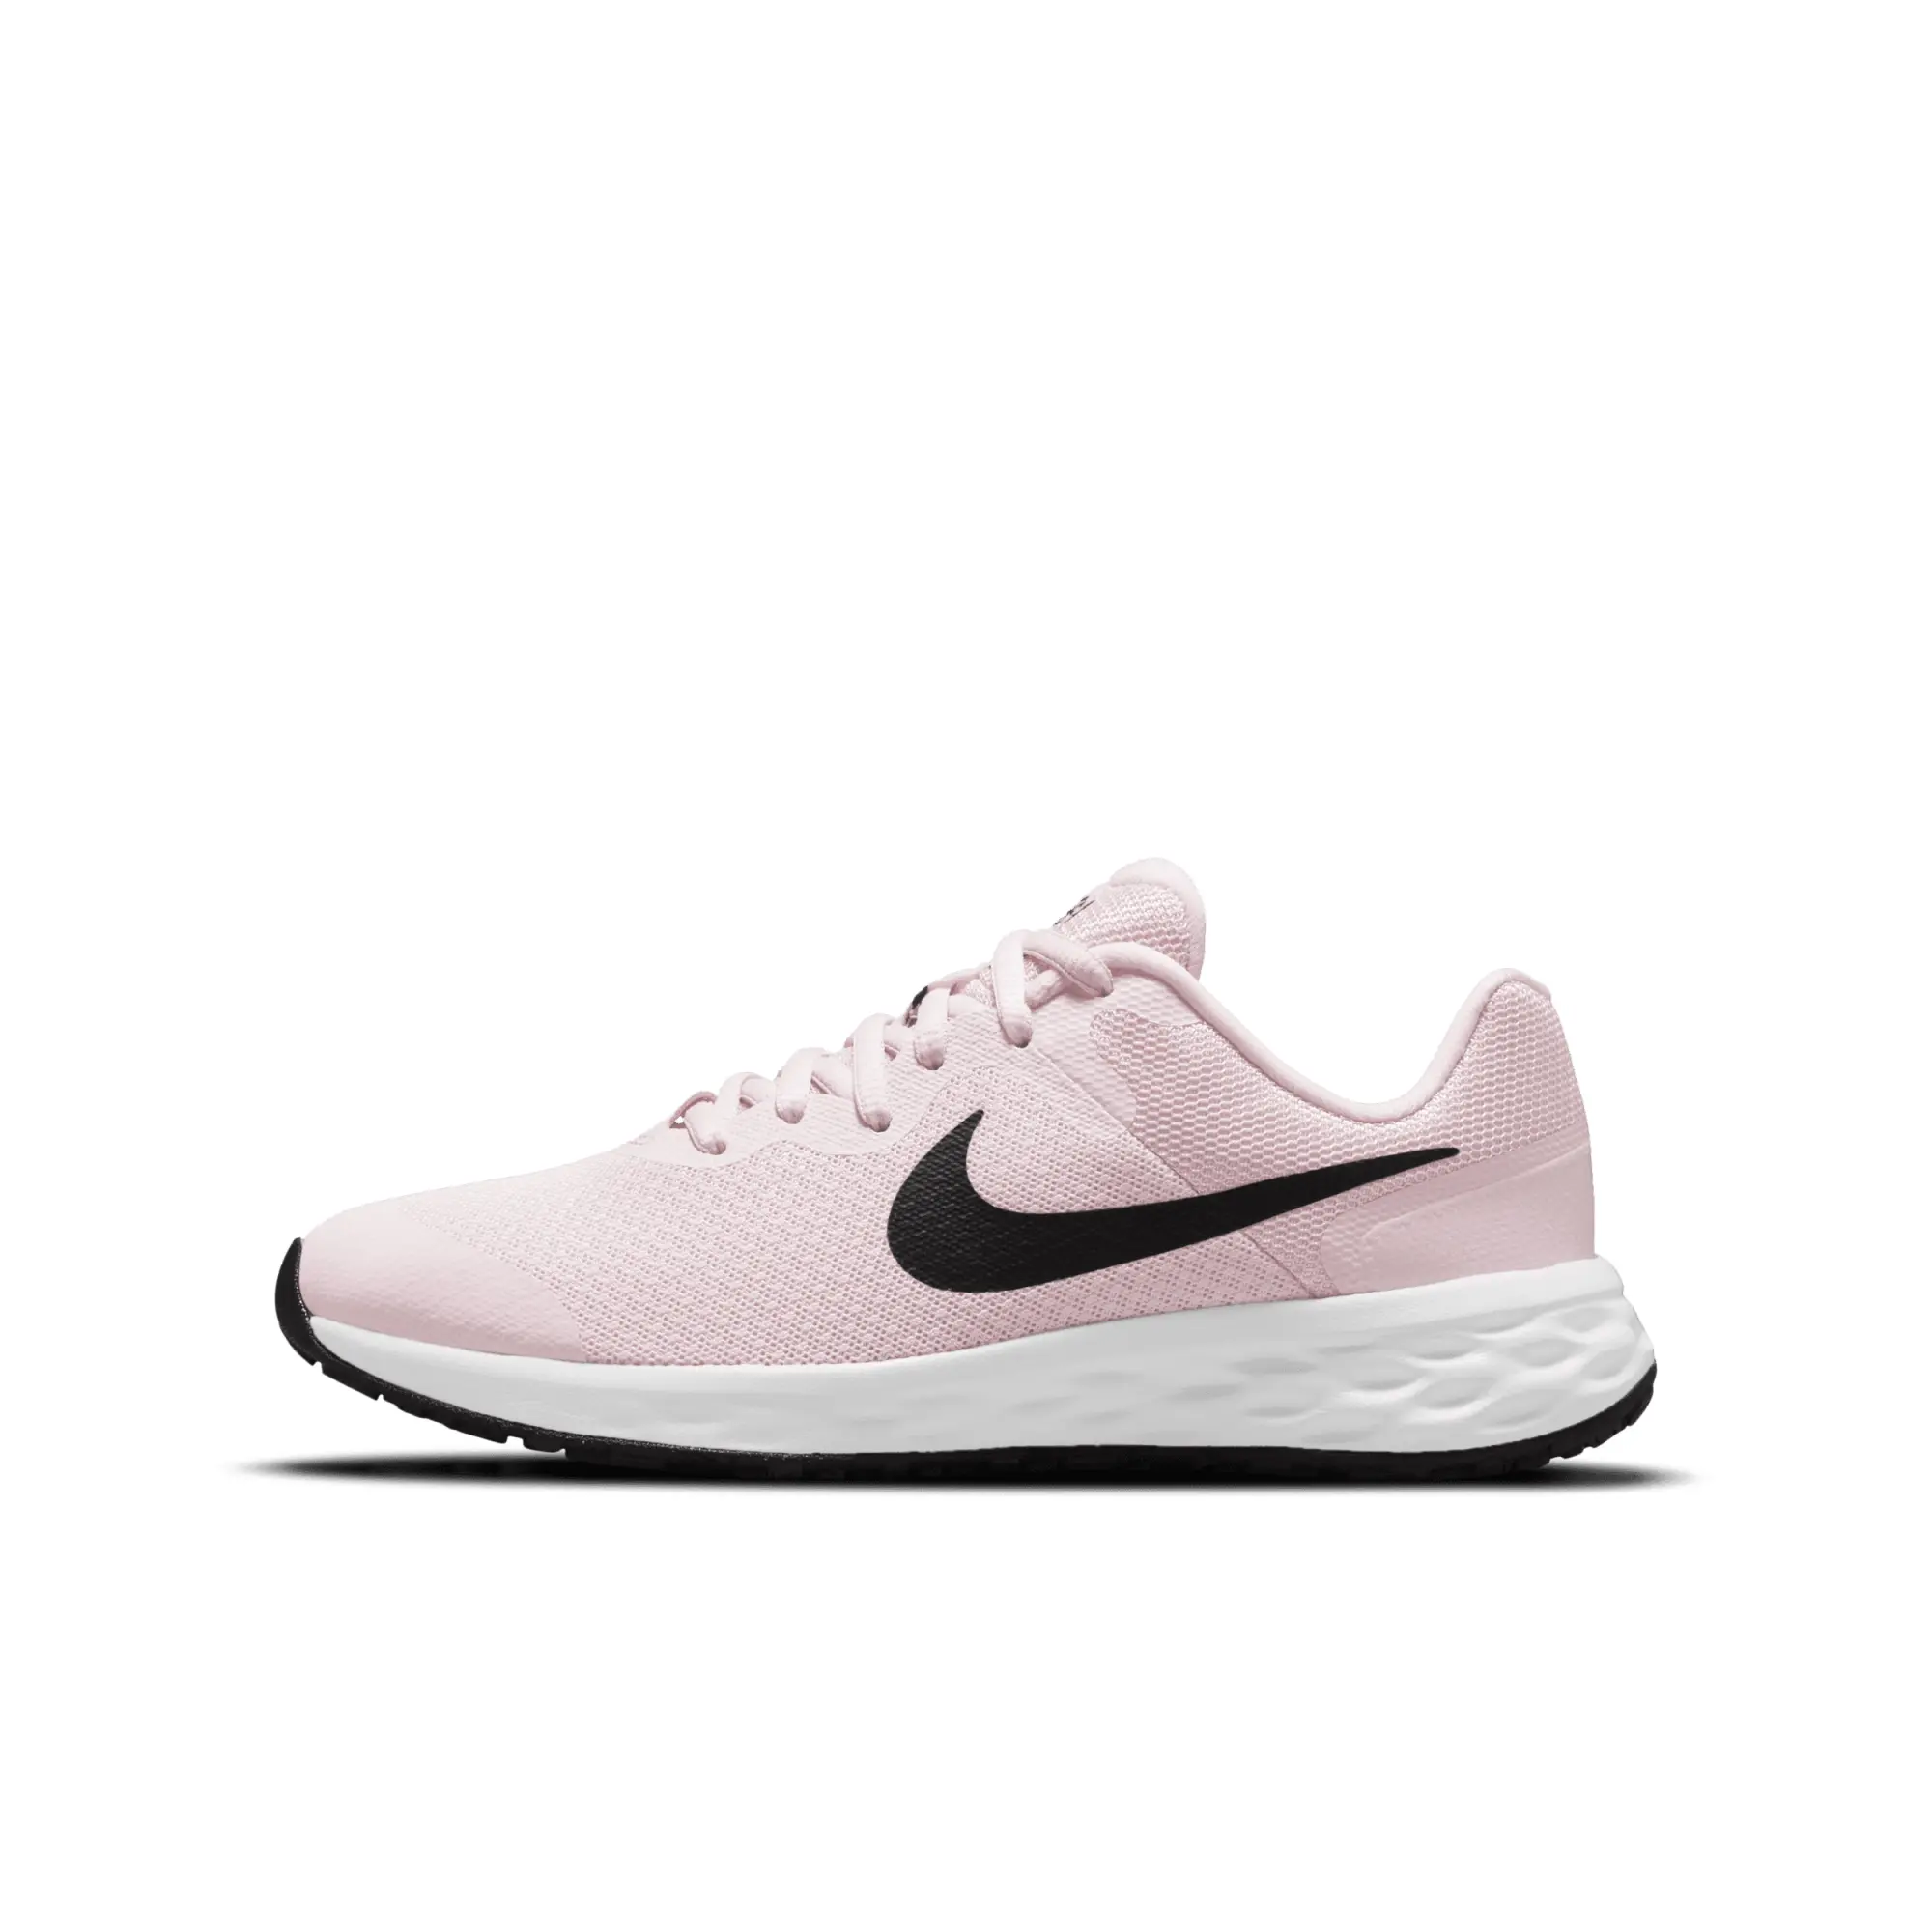 Nike pale pink revolution 6 Girls Youth Trainers